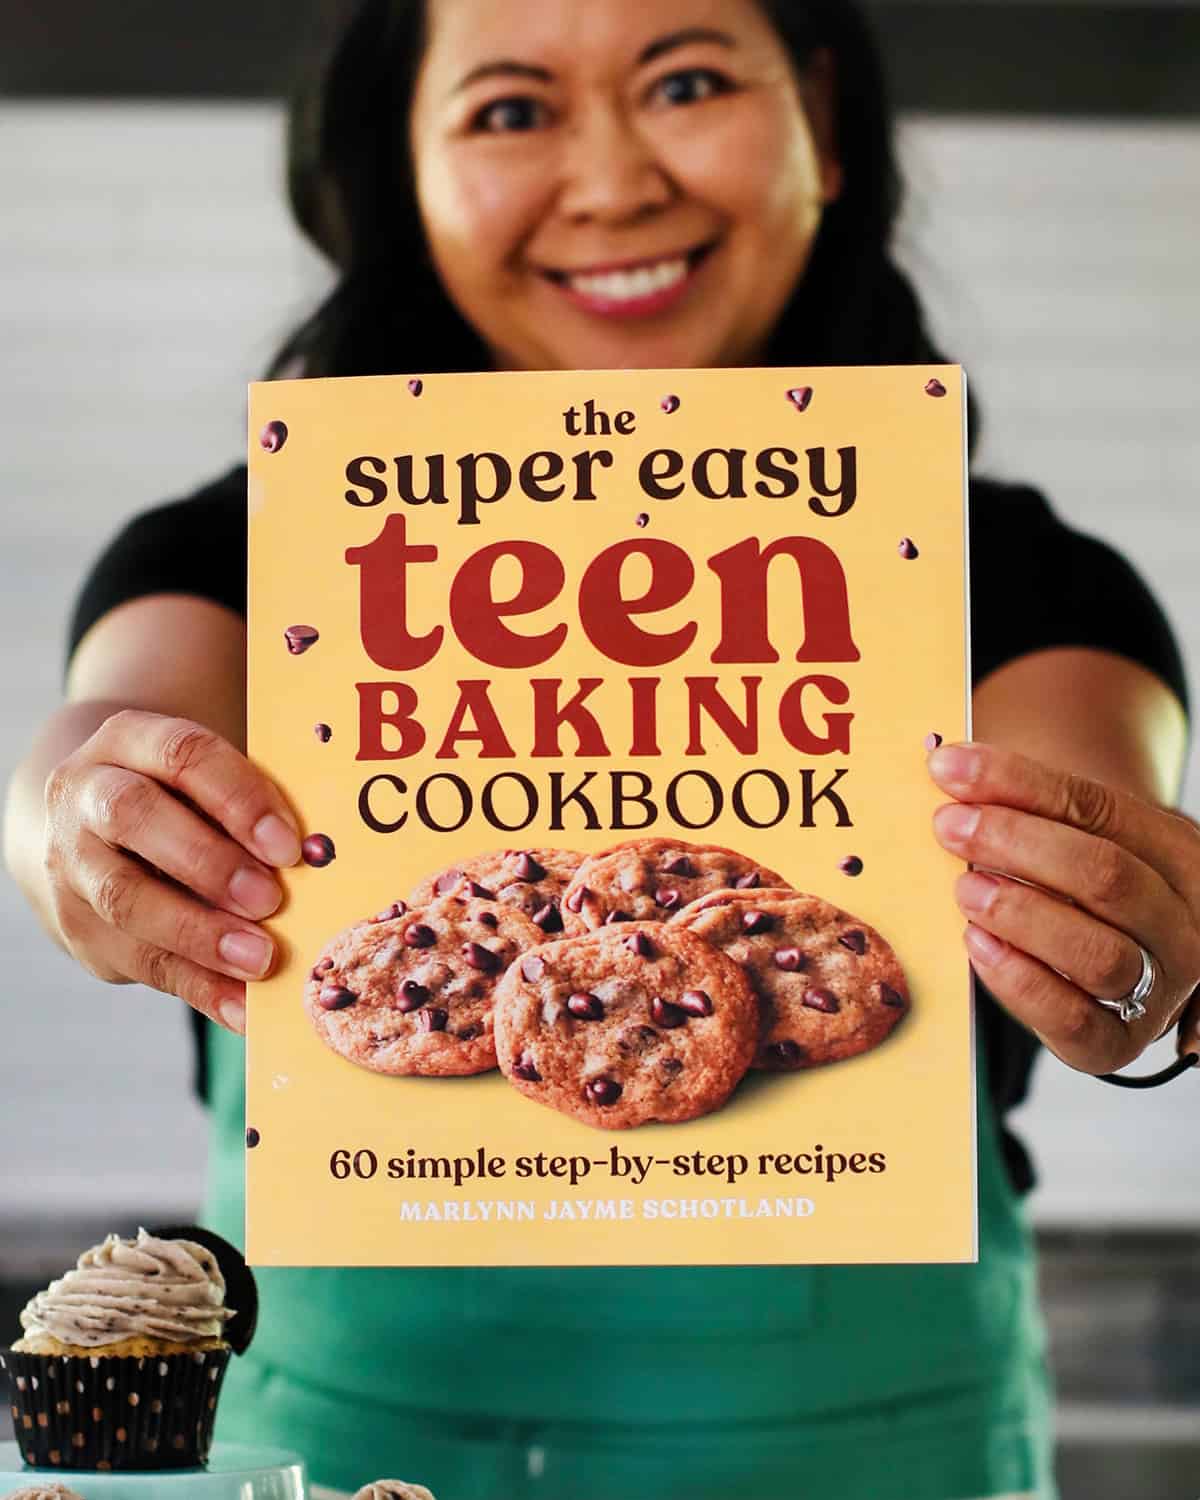 Marlynn holding out Super Easy Teen Cookbook